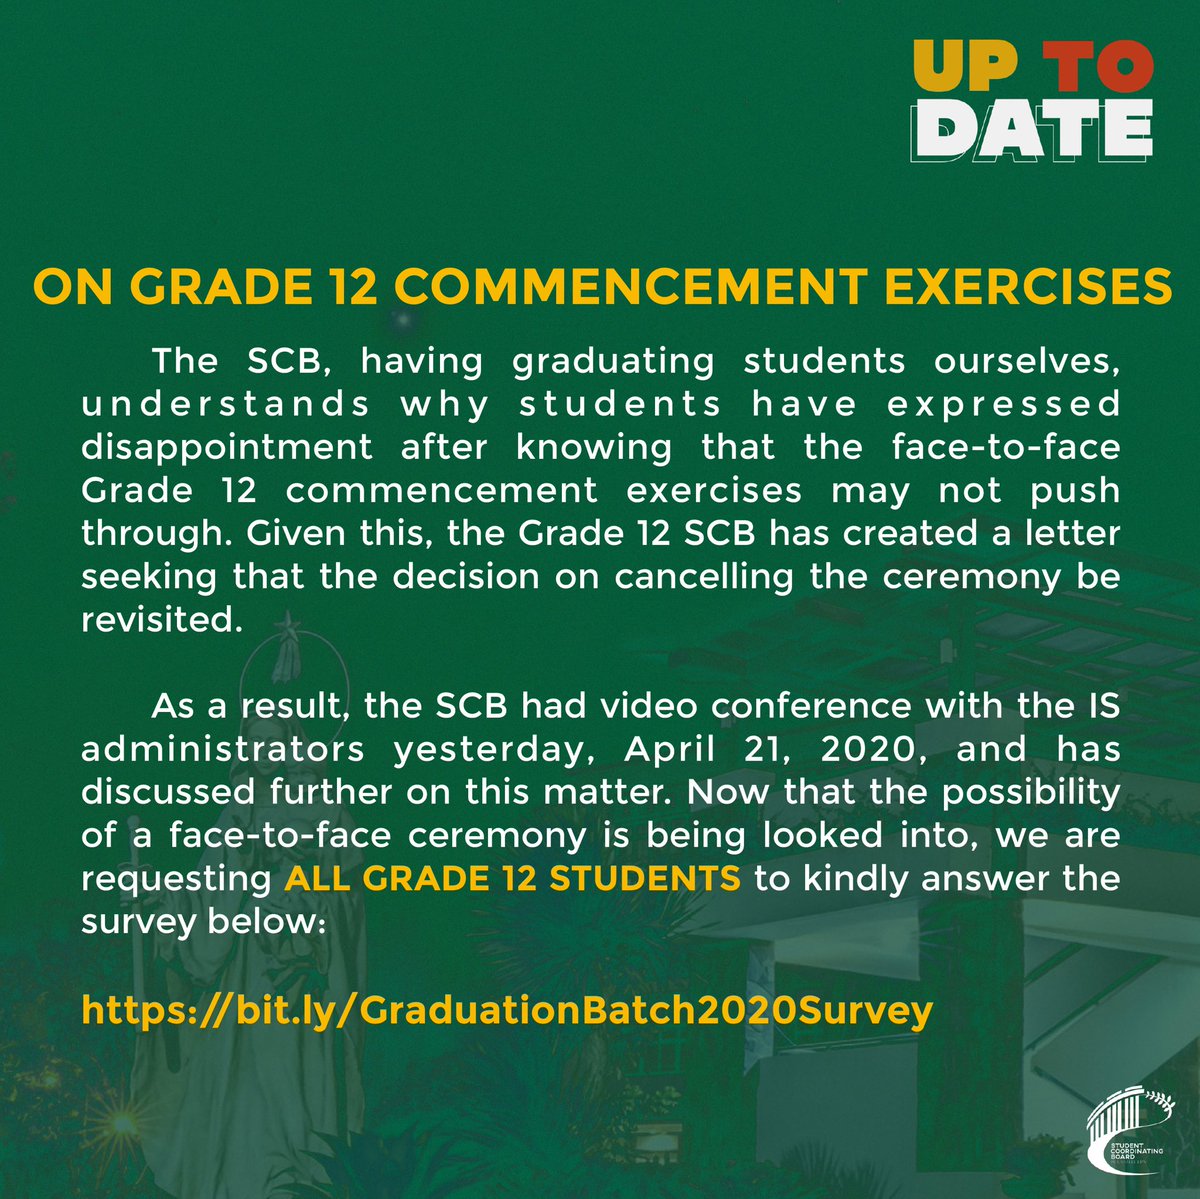 LOOK: The possibility of a face-to-face graduation ceremony is now being looked into. As agreed upon during the VCA meeting, a survey with legitimate contact details of the student respondents regarding the Grade 12 Commencement Exercises shall be conducted. (1/2)